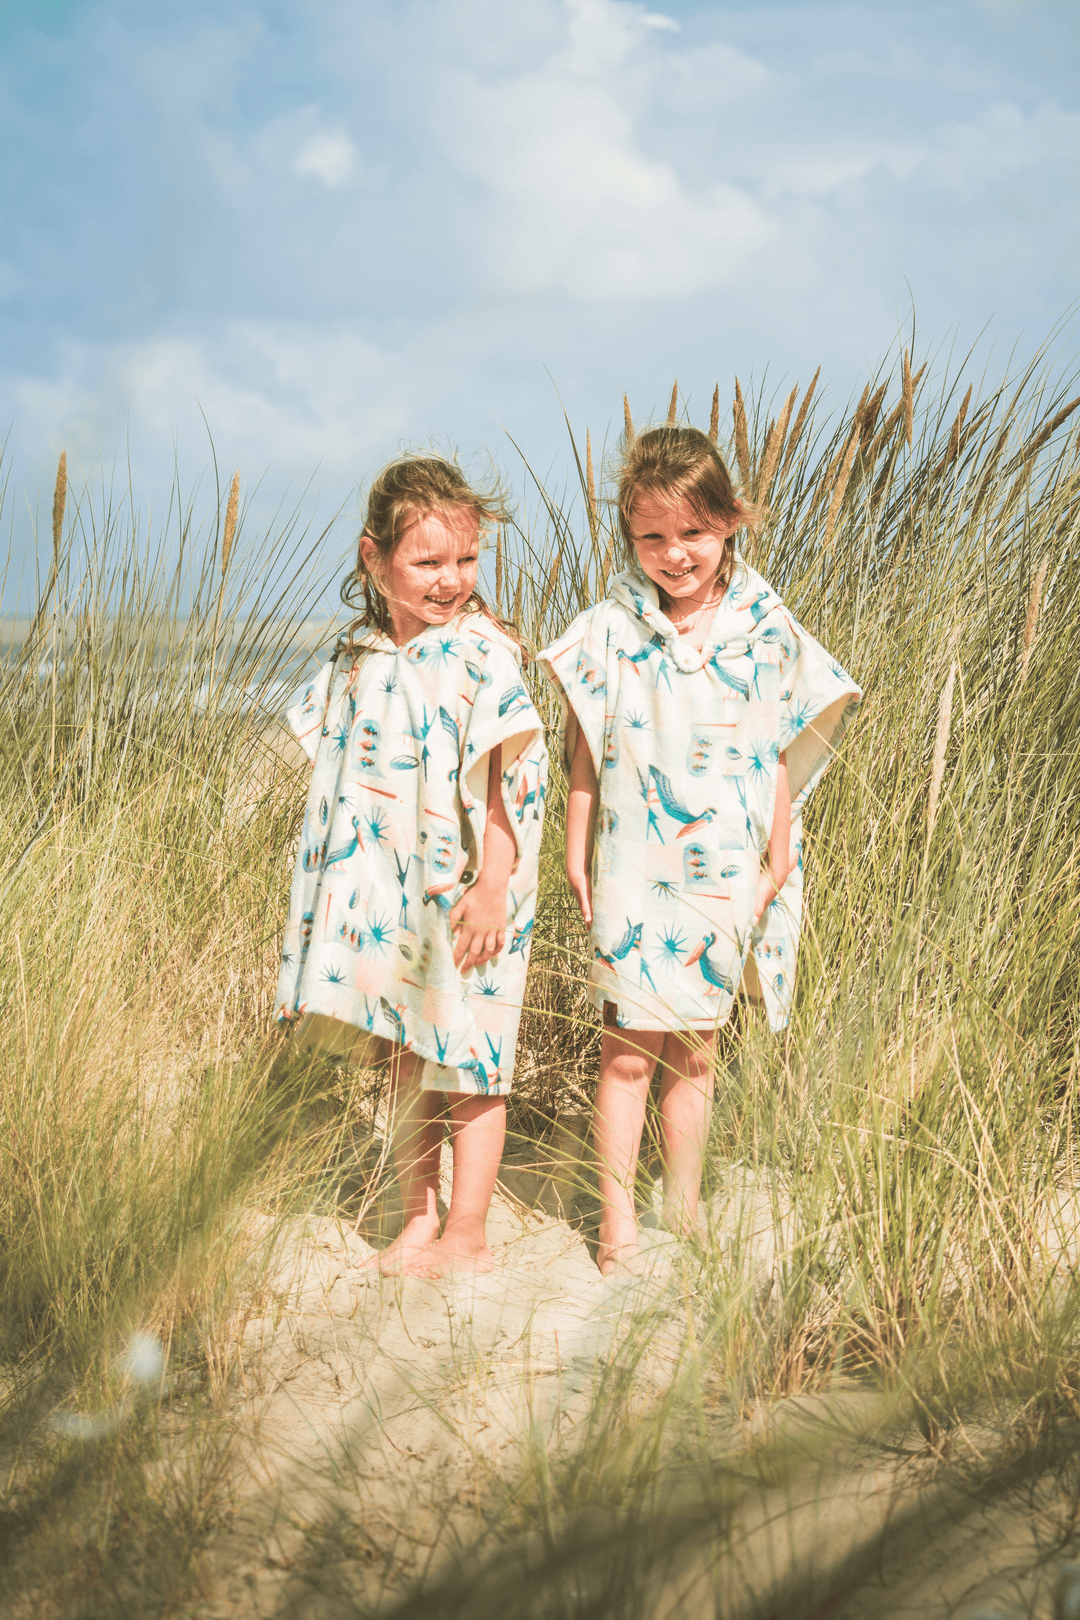 No more going home cold after a long day of playing at the beach. Keep your favorite kiddo’s warm with our surf poncho for kids. The sundown-colored seabirds will give them that beach feeling everywhere they go.